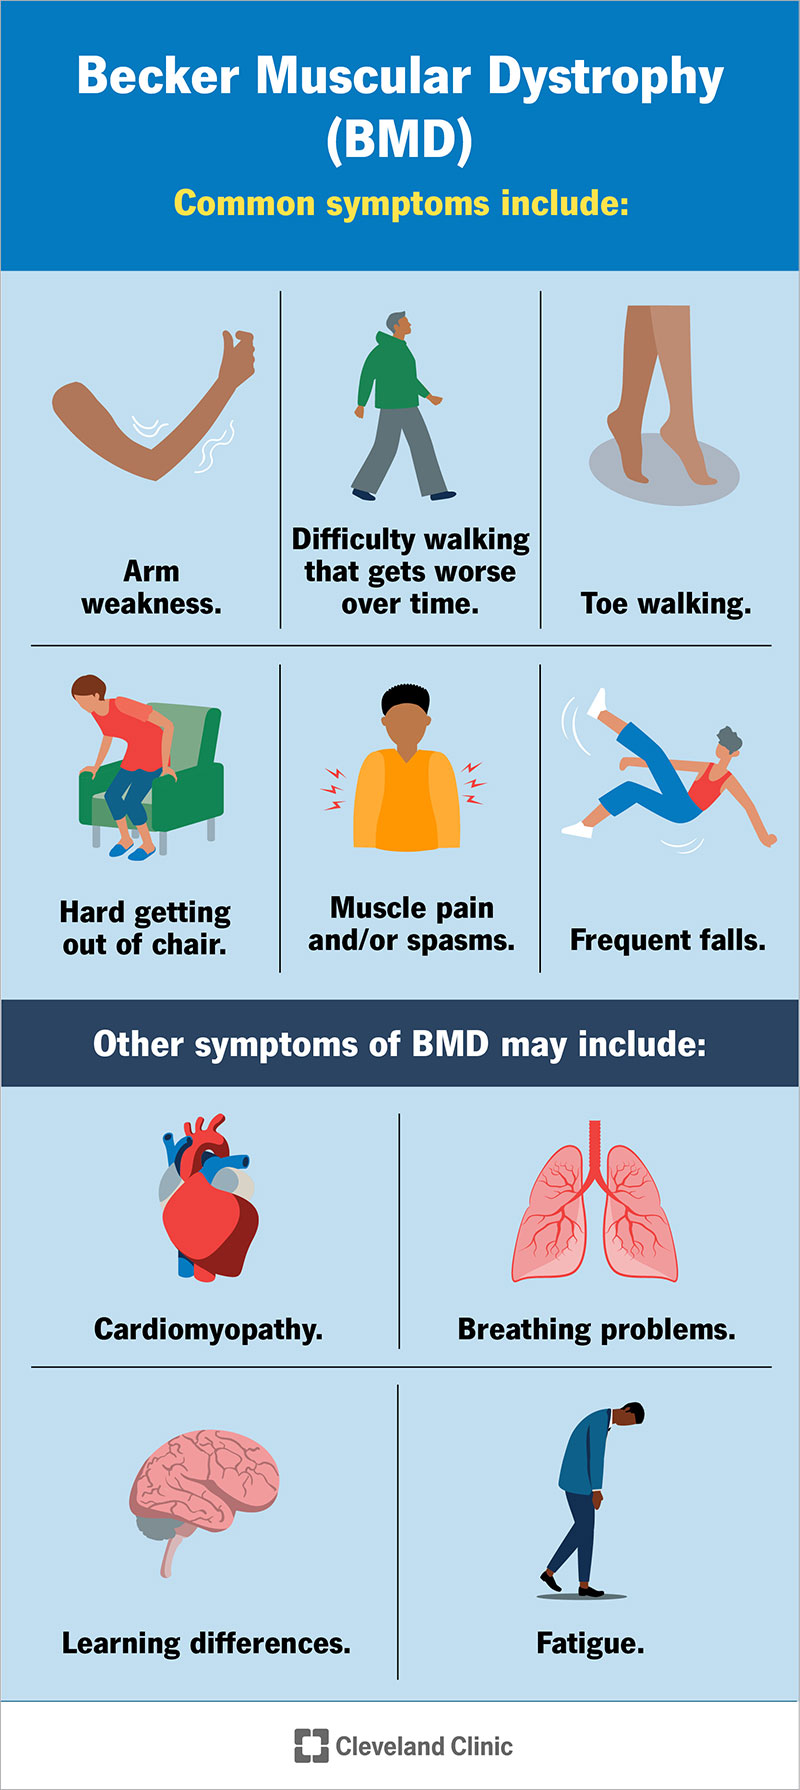 Symptoms of BMD include low tolerance for exercise, difficulty walking, fatigue, muscle pain and spasms, cardiomyopathy and more.